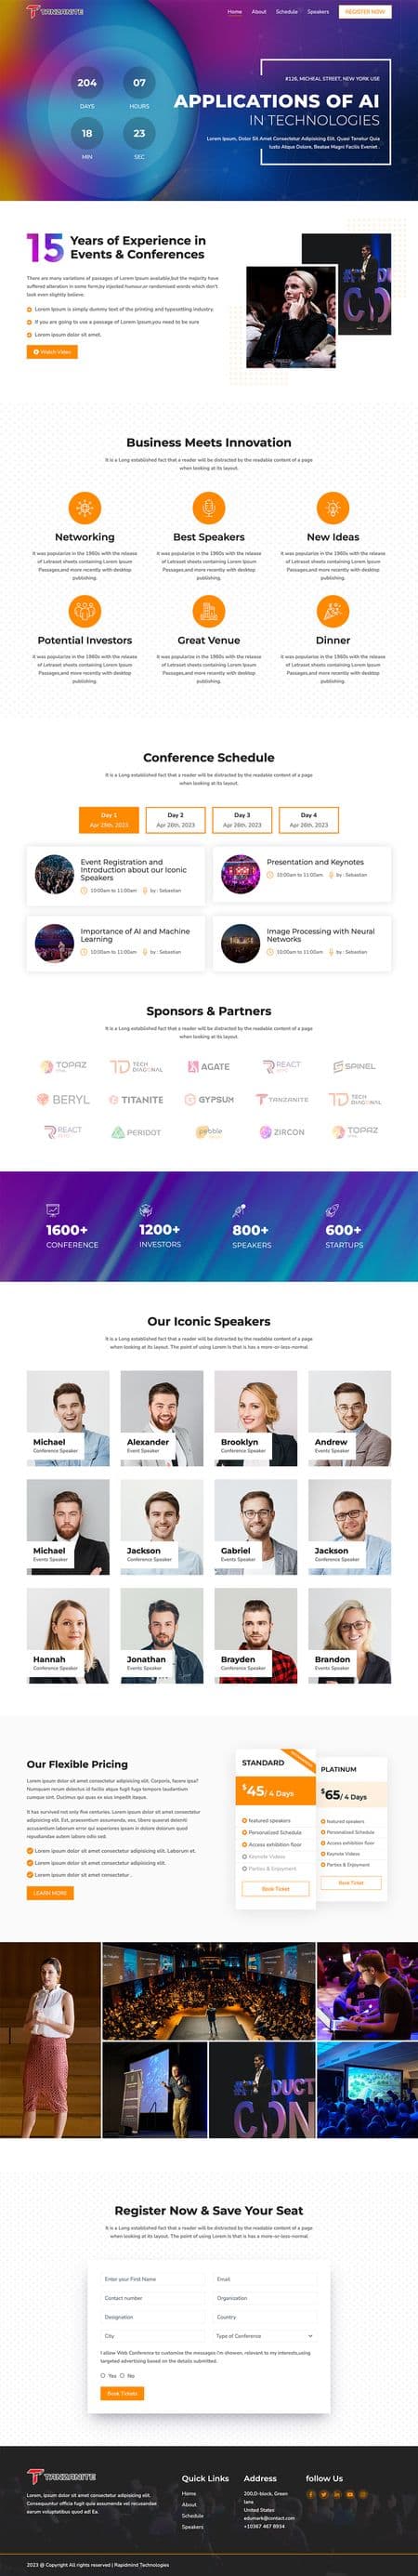 Tanzanite - Event and Conference Landing Pages Image 7